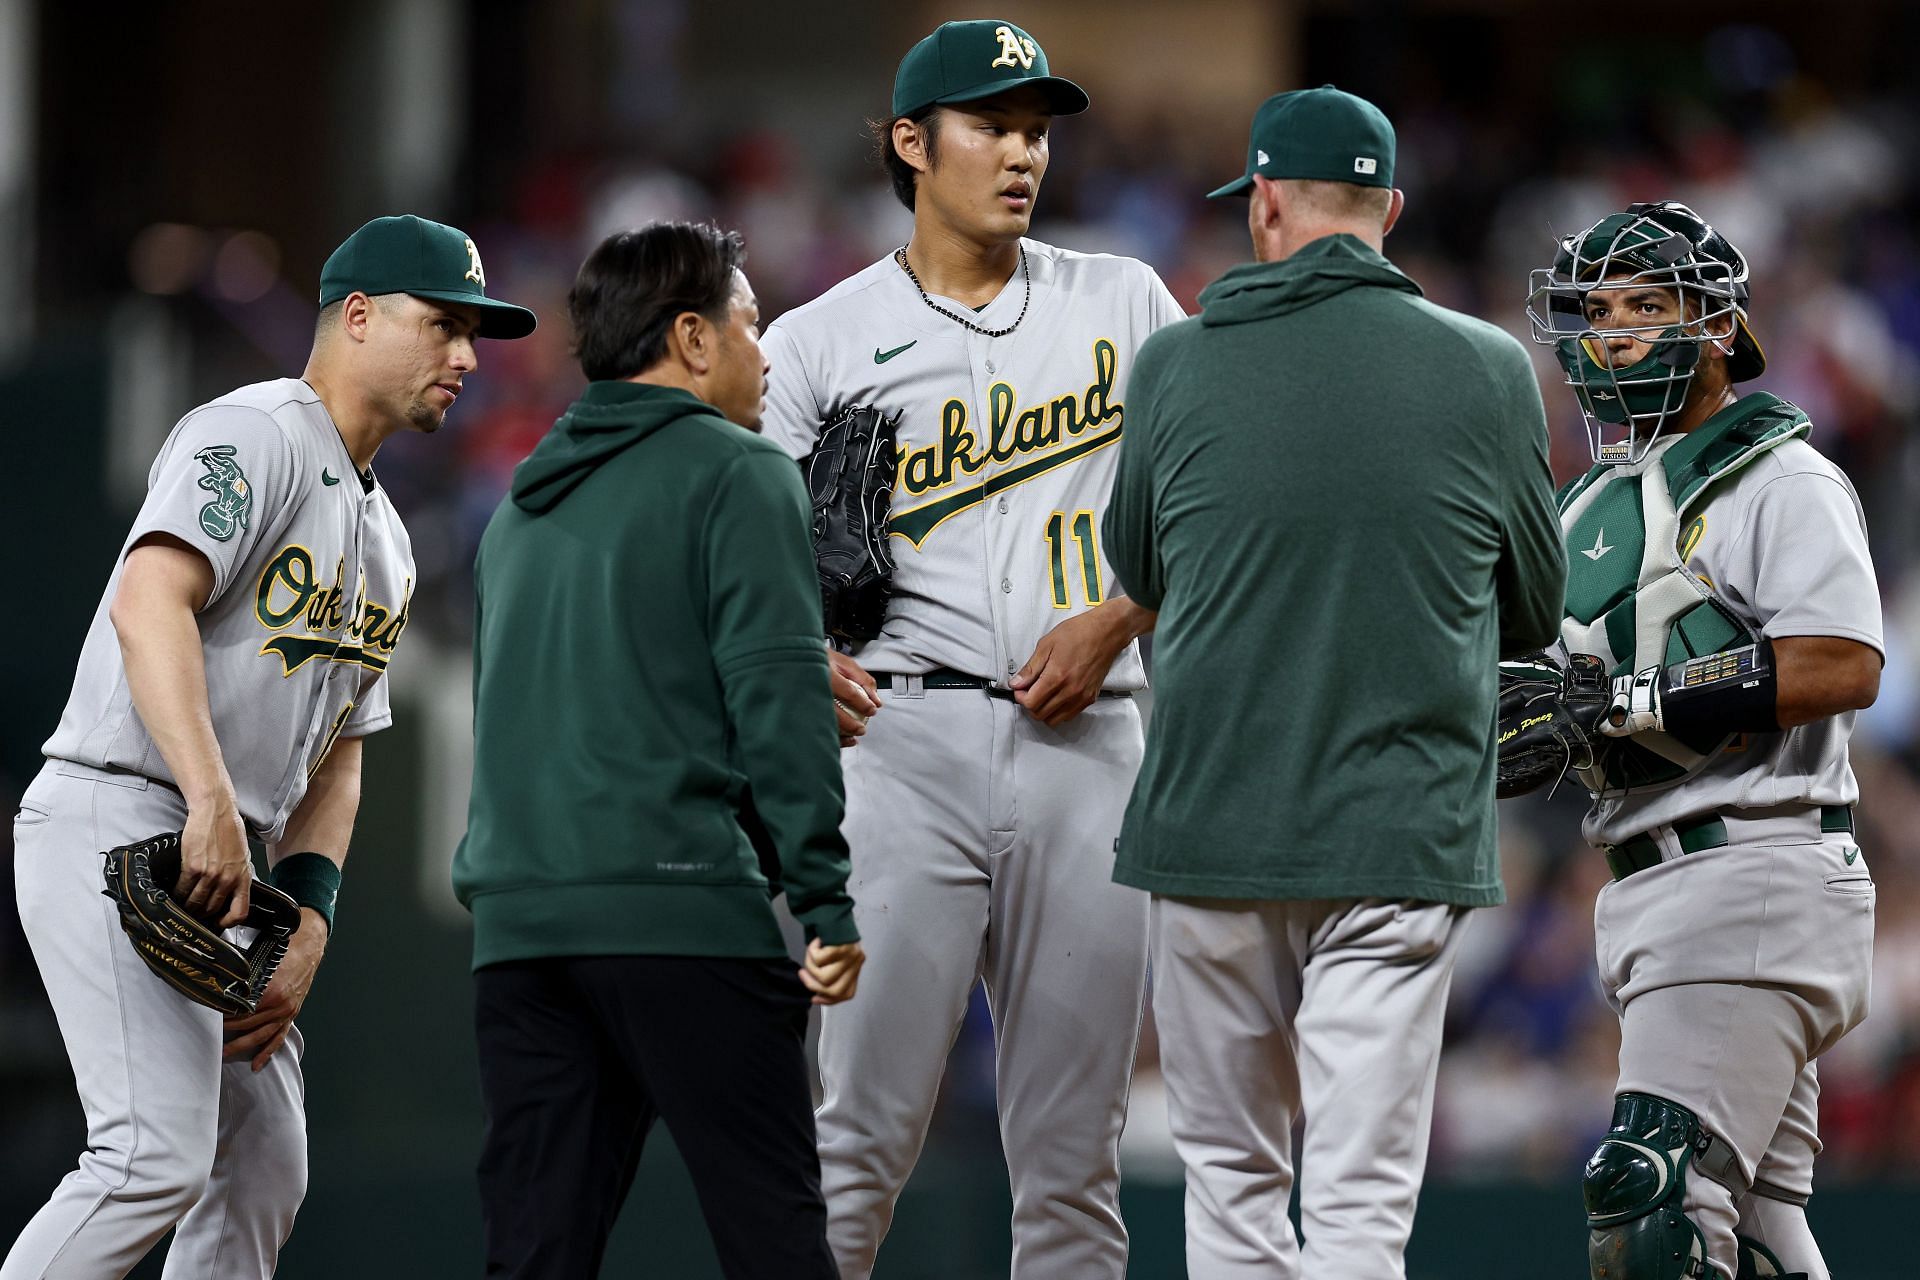 The Oakland Athletics Don't Need Taxpayers To Pay for Their New Stadium